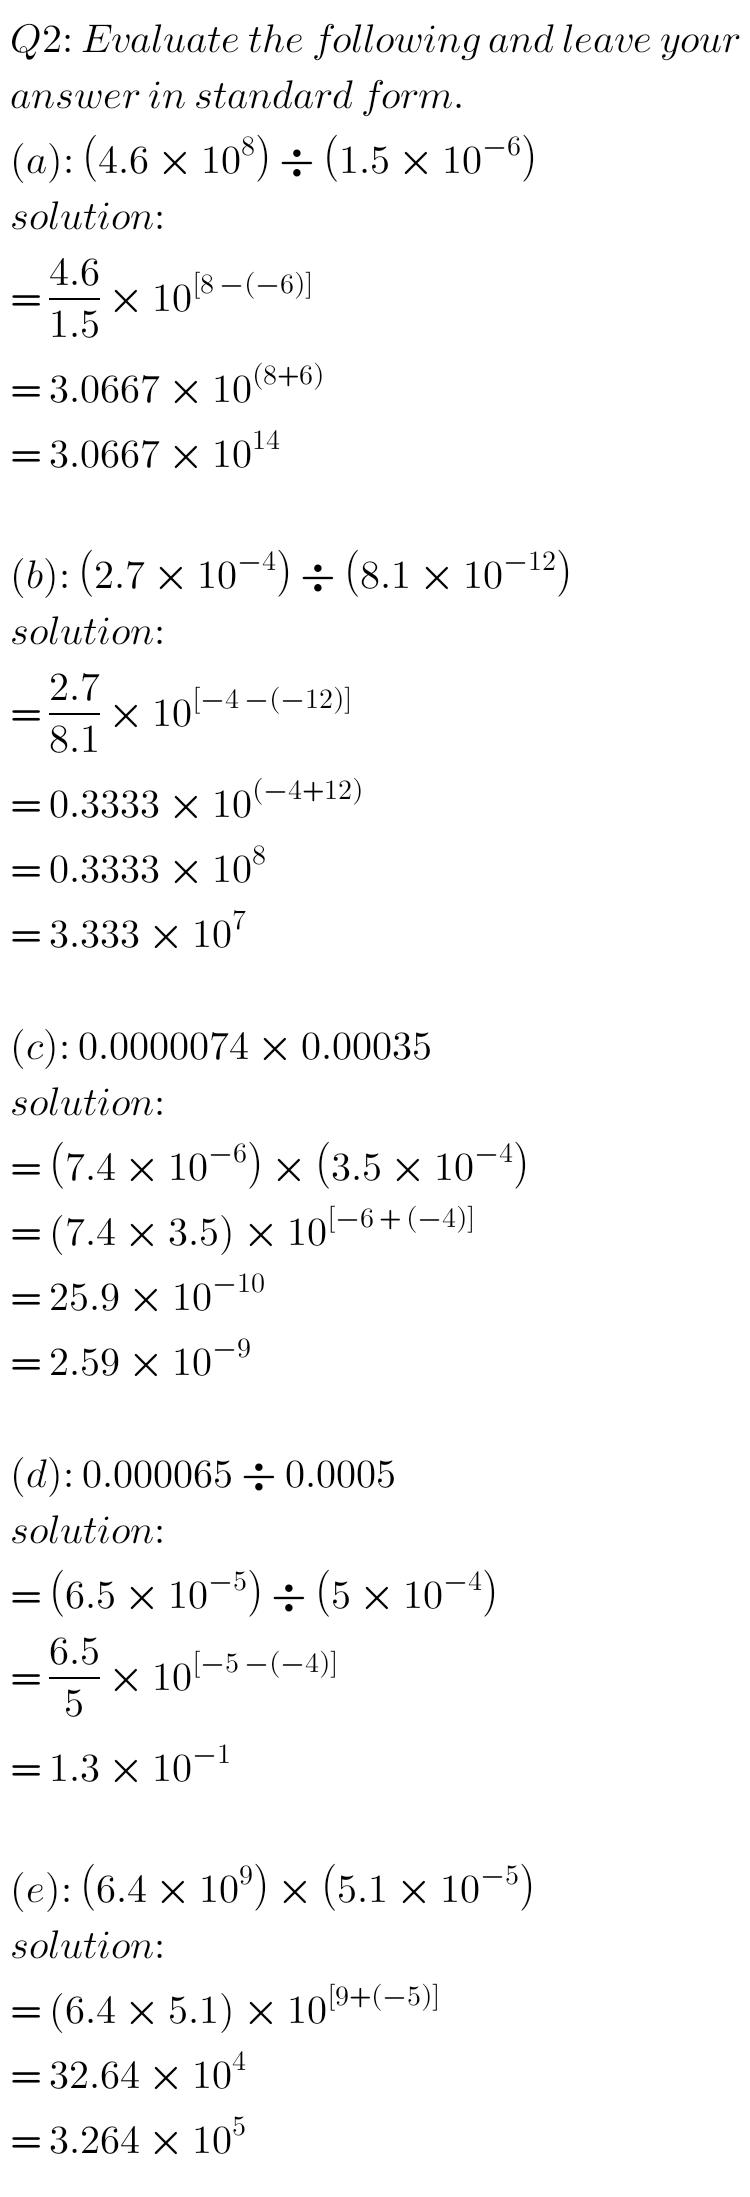 Question 2 and its Solution